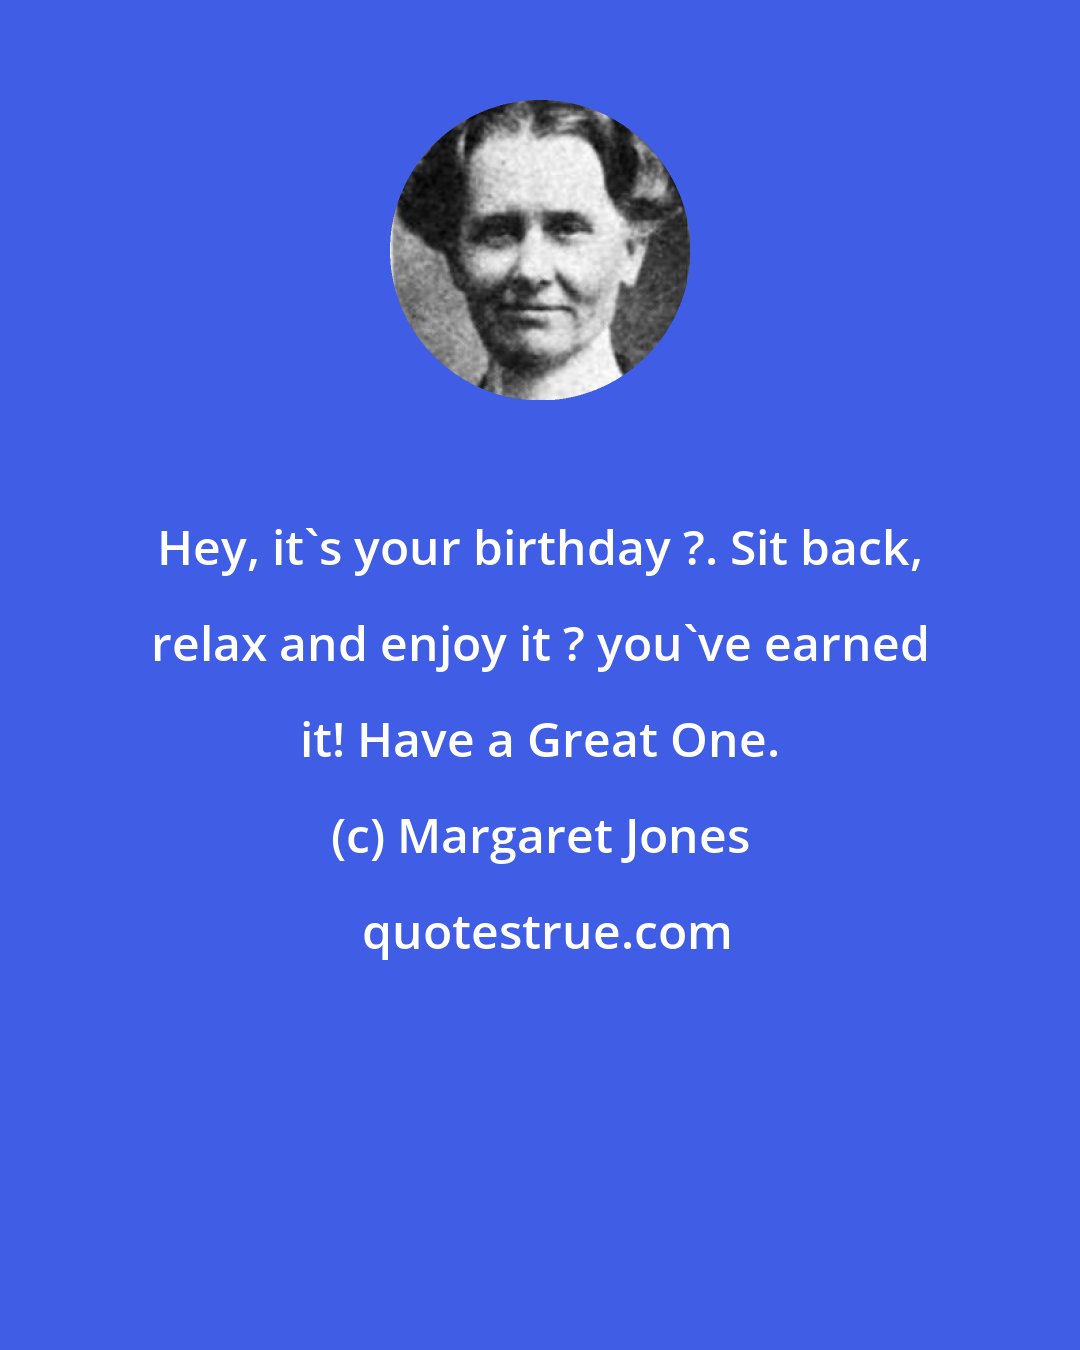 Margaret Jones: Hey, it's your birthday ?. Sit back, relax and enjoy it ? you've earned it! Have a Great One.